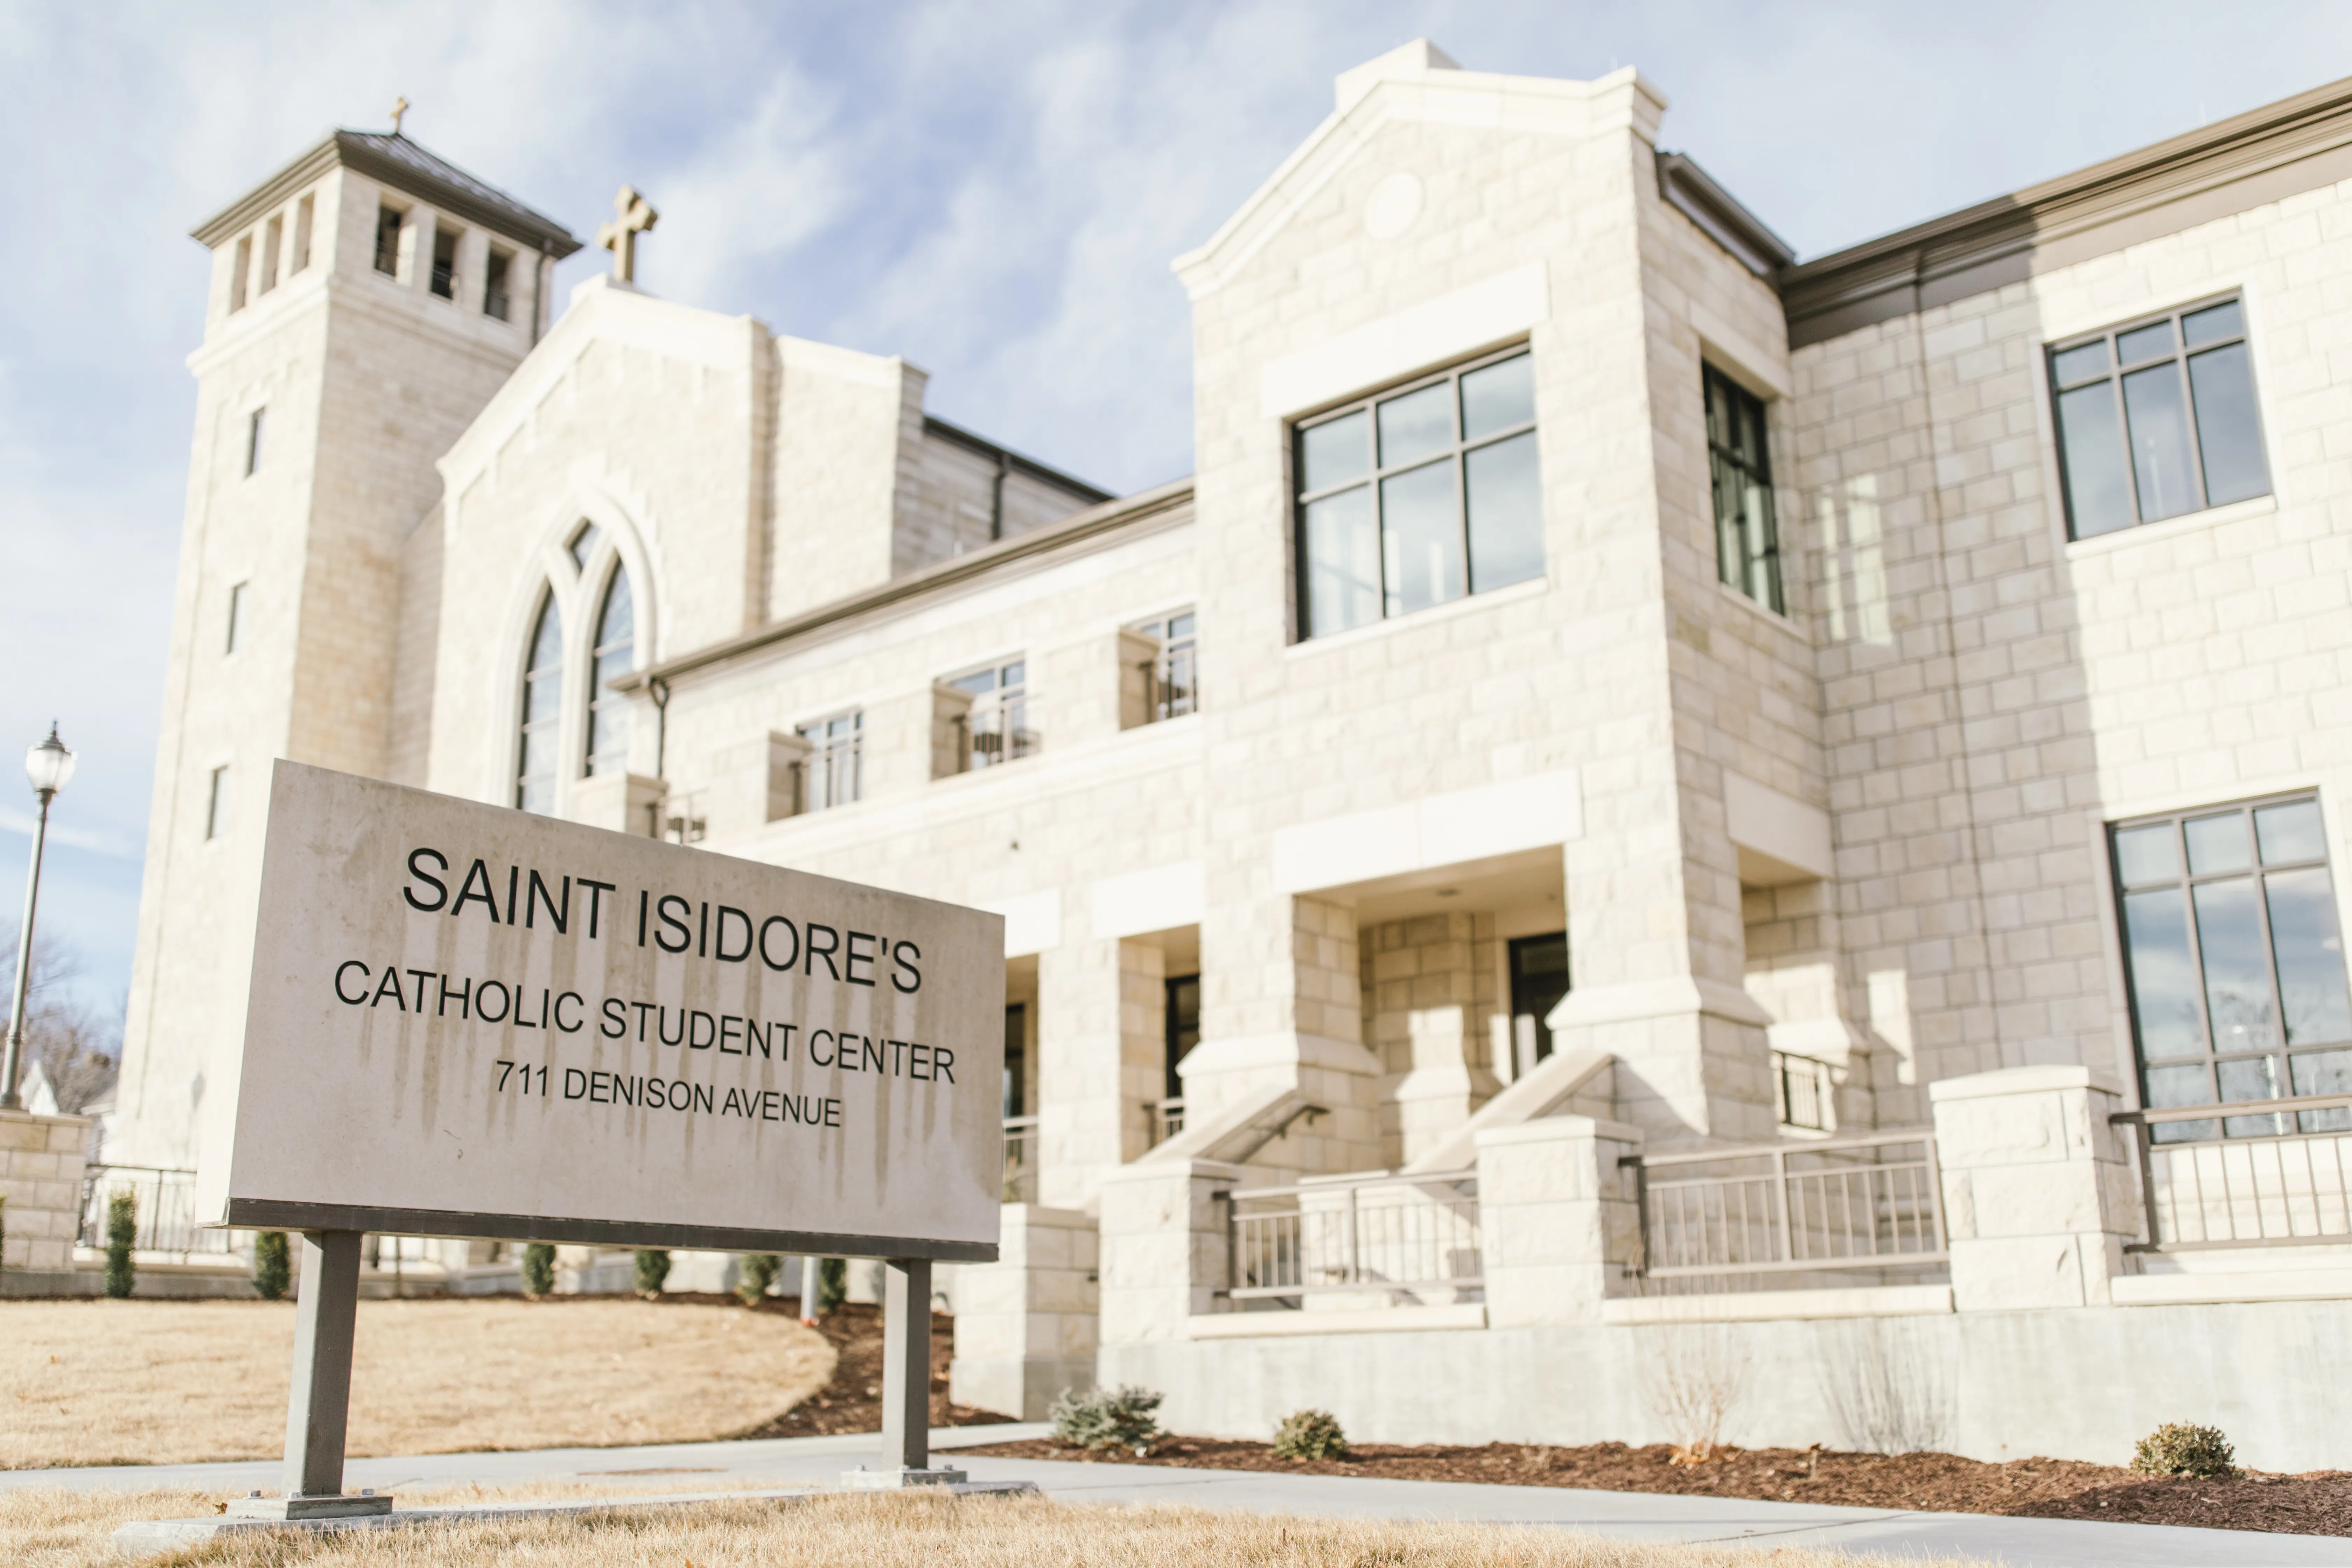 The exterior of the new St. Isidore's Catholic Student Center at Kansas State University.?w=200&h=150